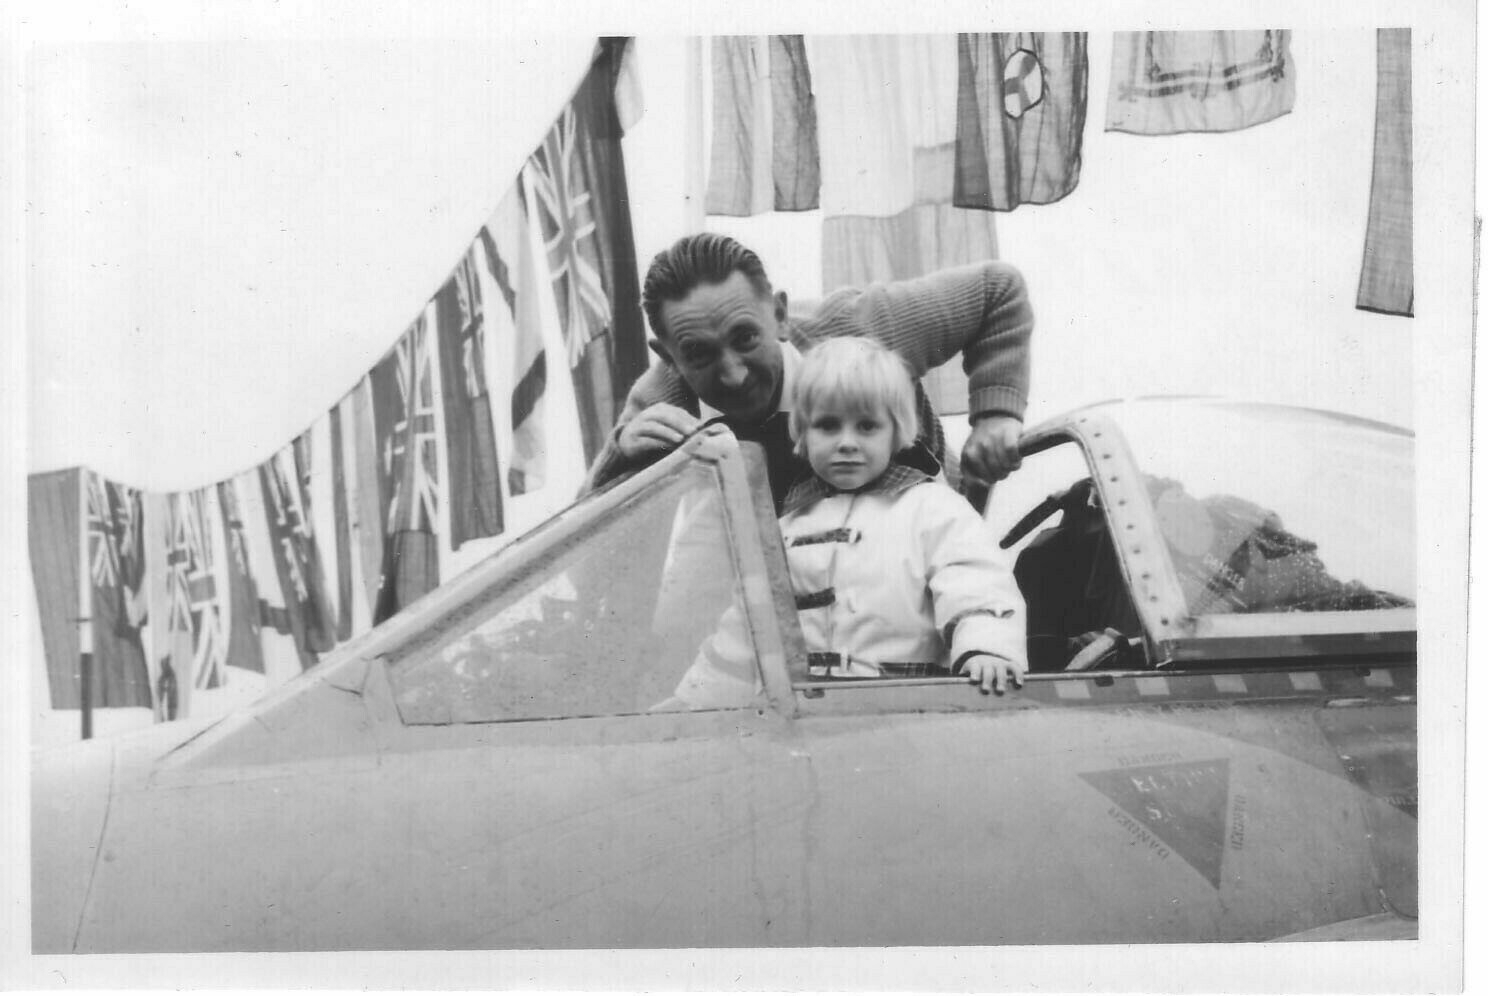 3 year old Alex sat in an English Electric Lightning fighter jet, with my dad looking on